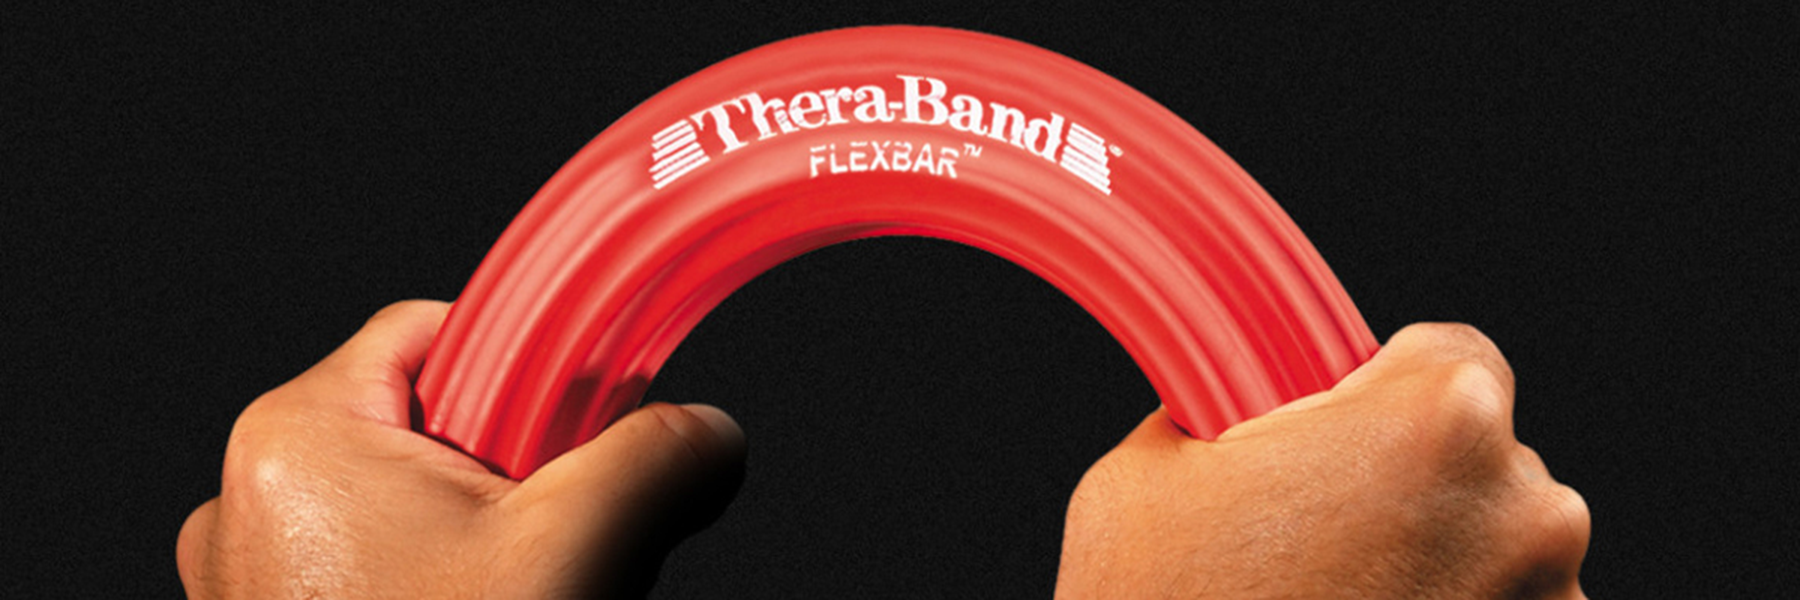 Theraband Products At Therapy